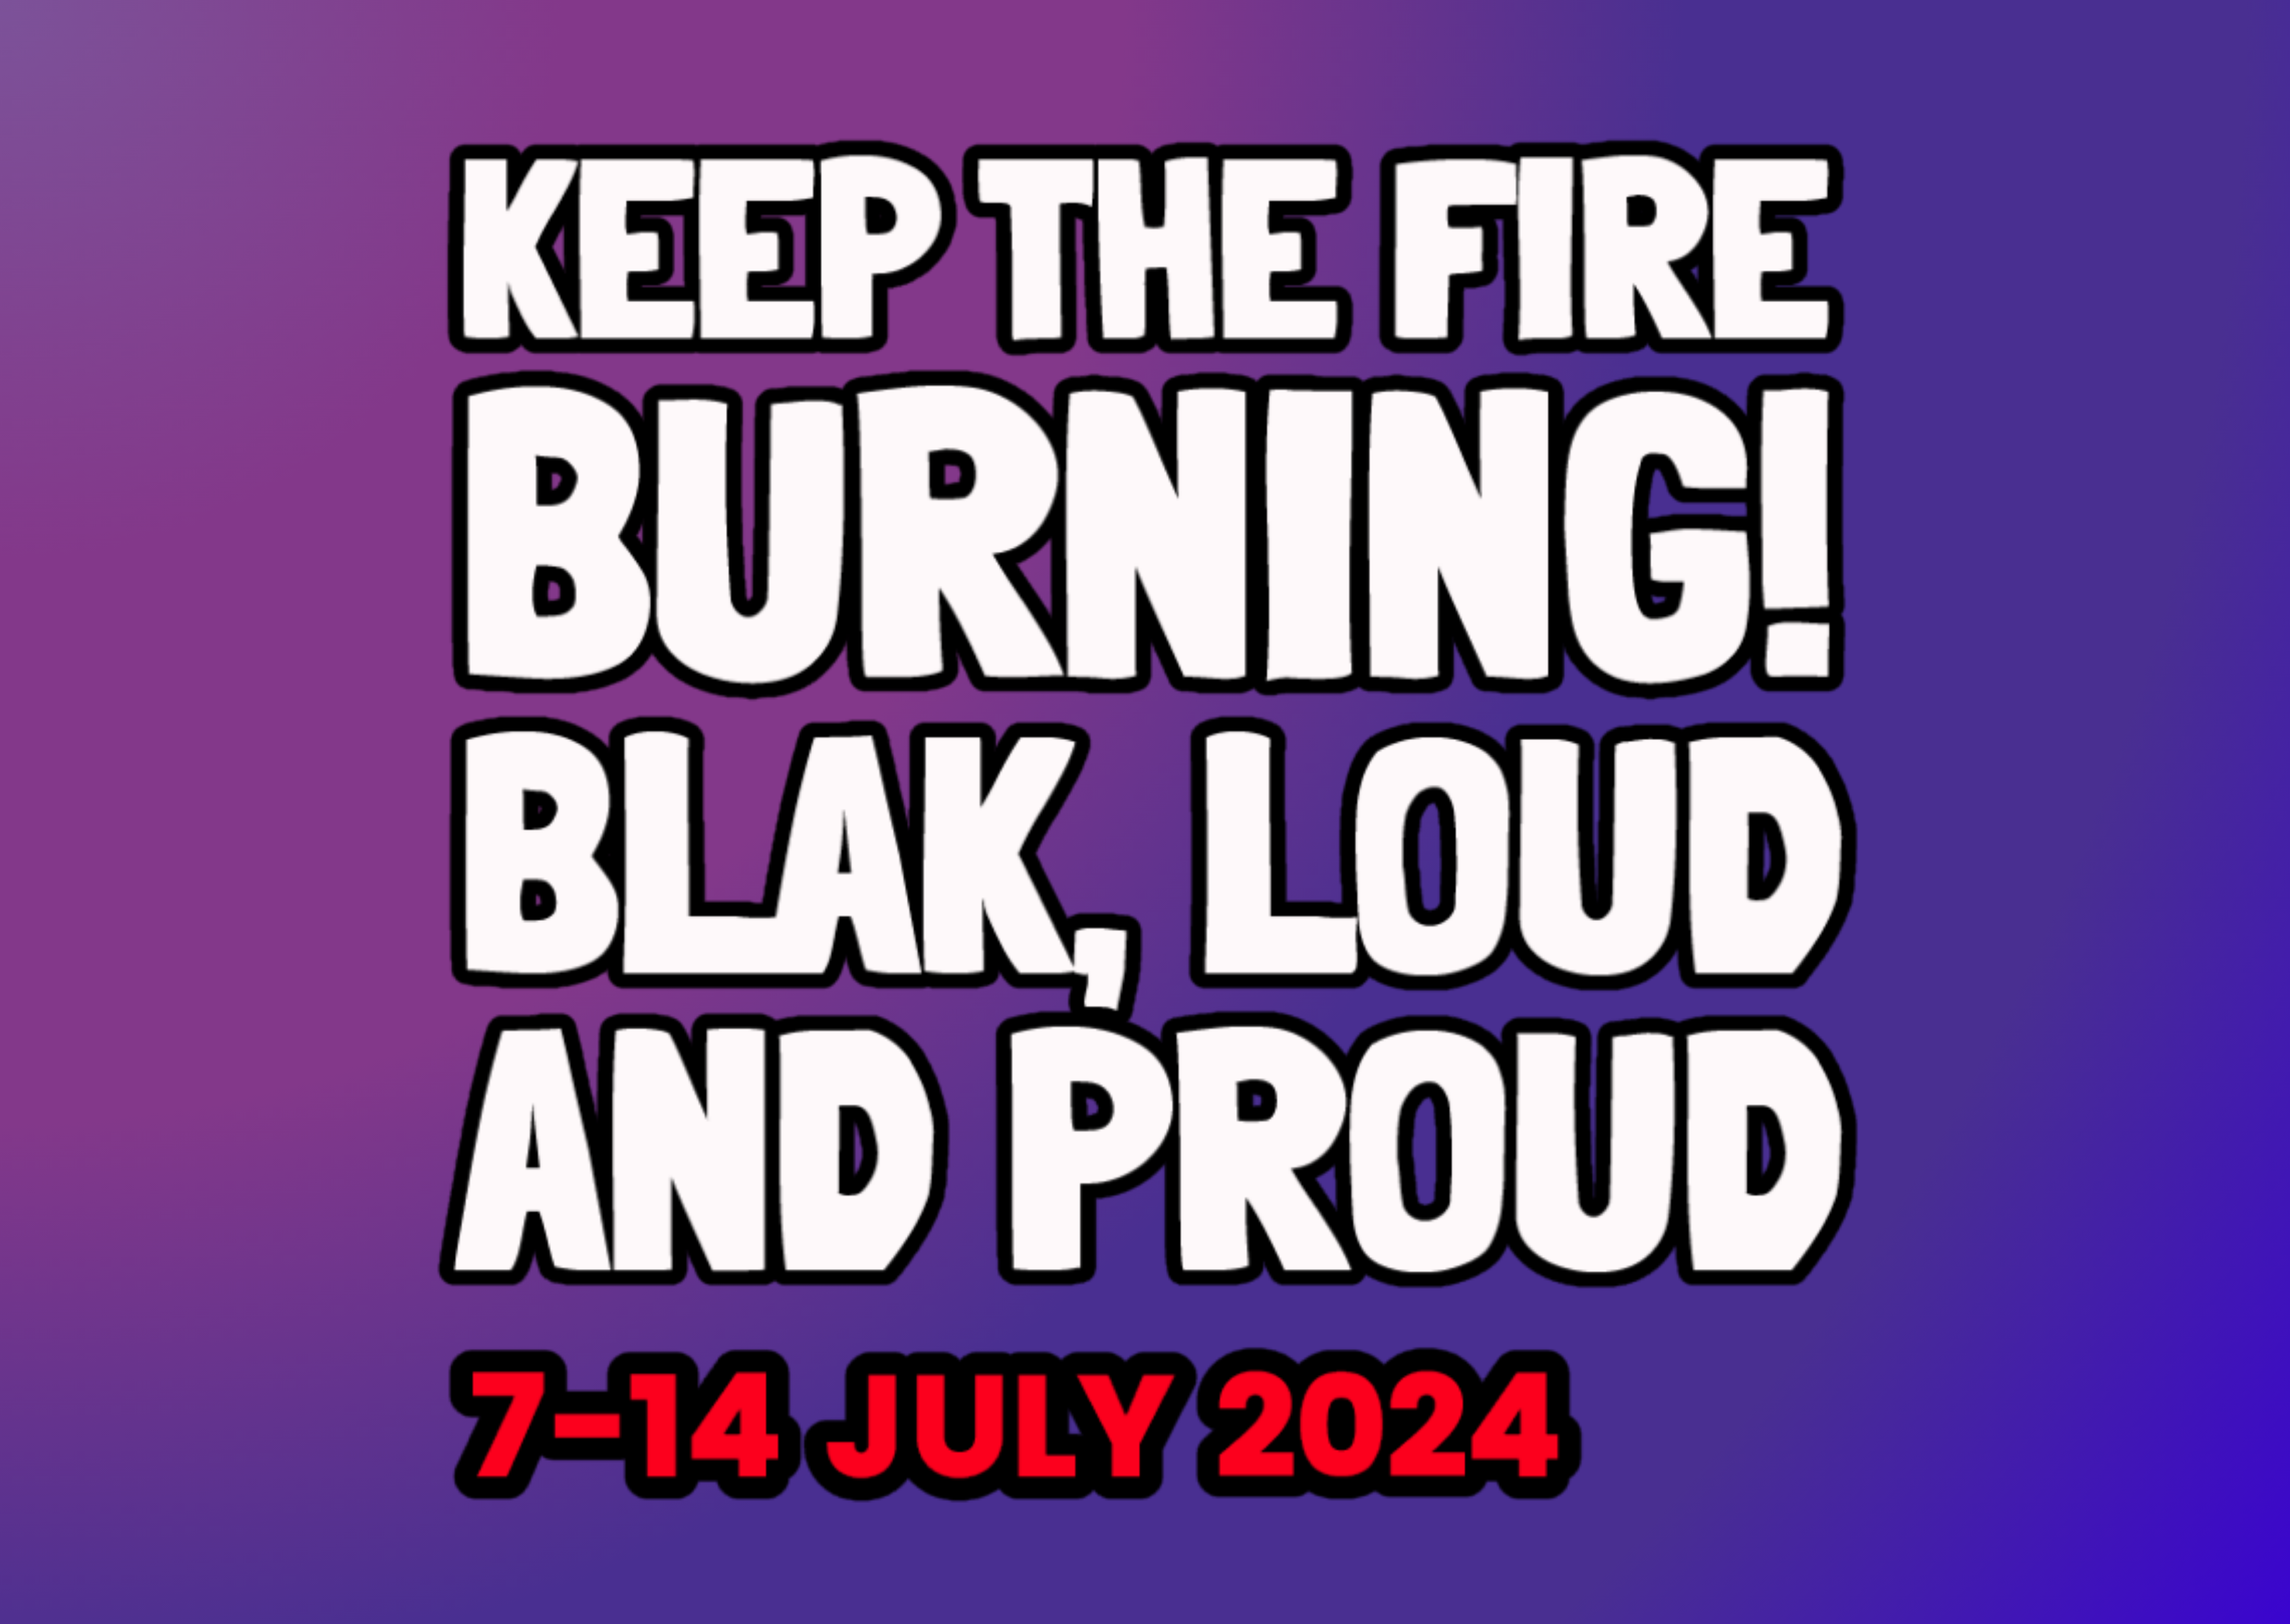 [Image: A purple gradient background, large white text reads: "Keep the fire burning! Blak, loud and proud". Red text below it says "7-14 July 2024".]